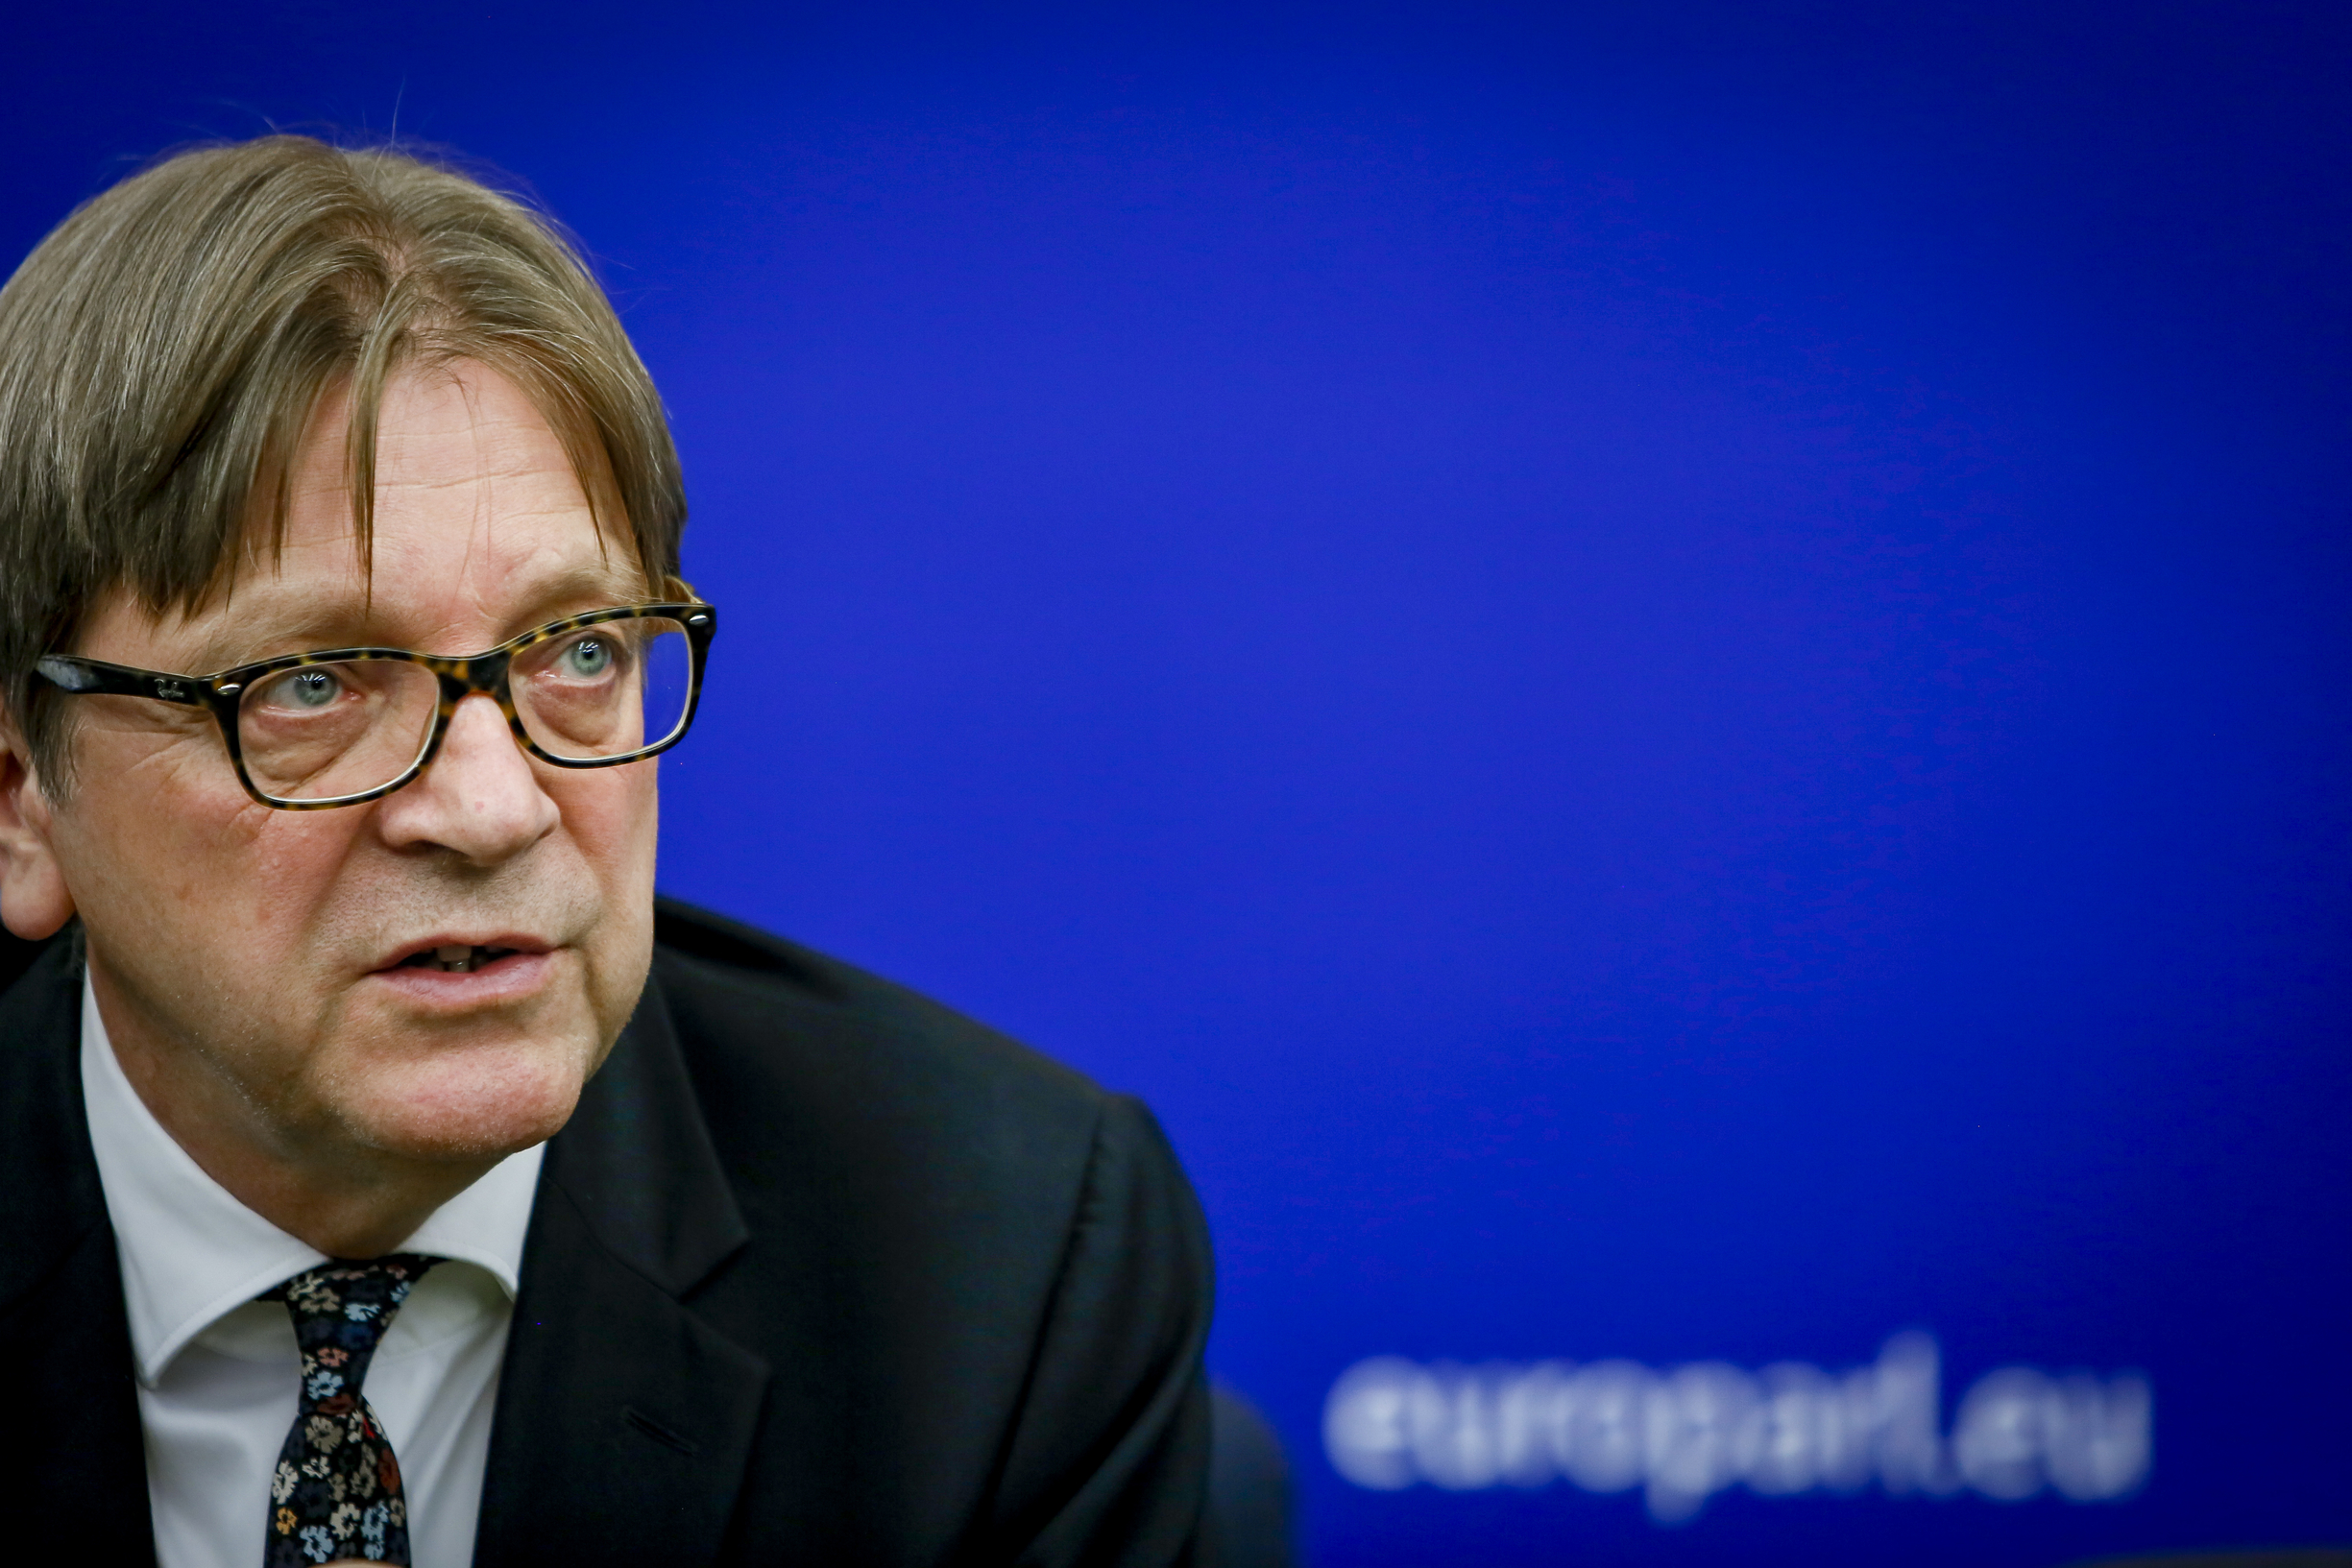 Guy Verhofstadt & Renew Europe CoR discuss future of Europe Conference